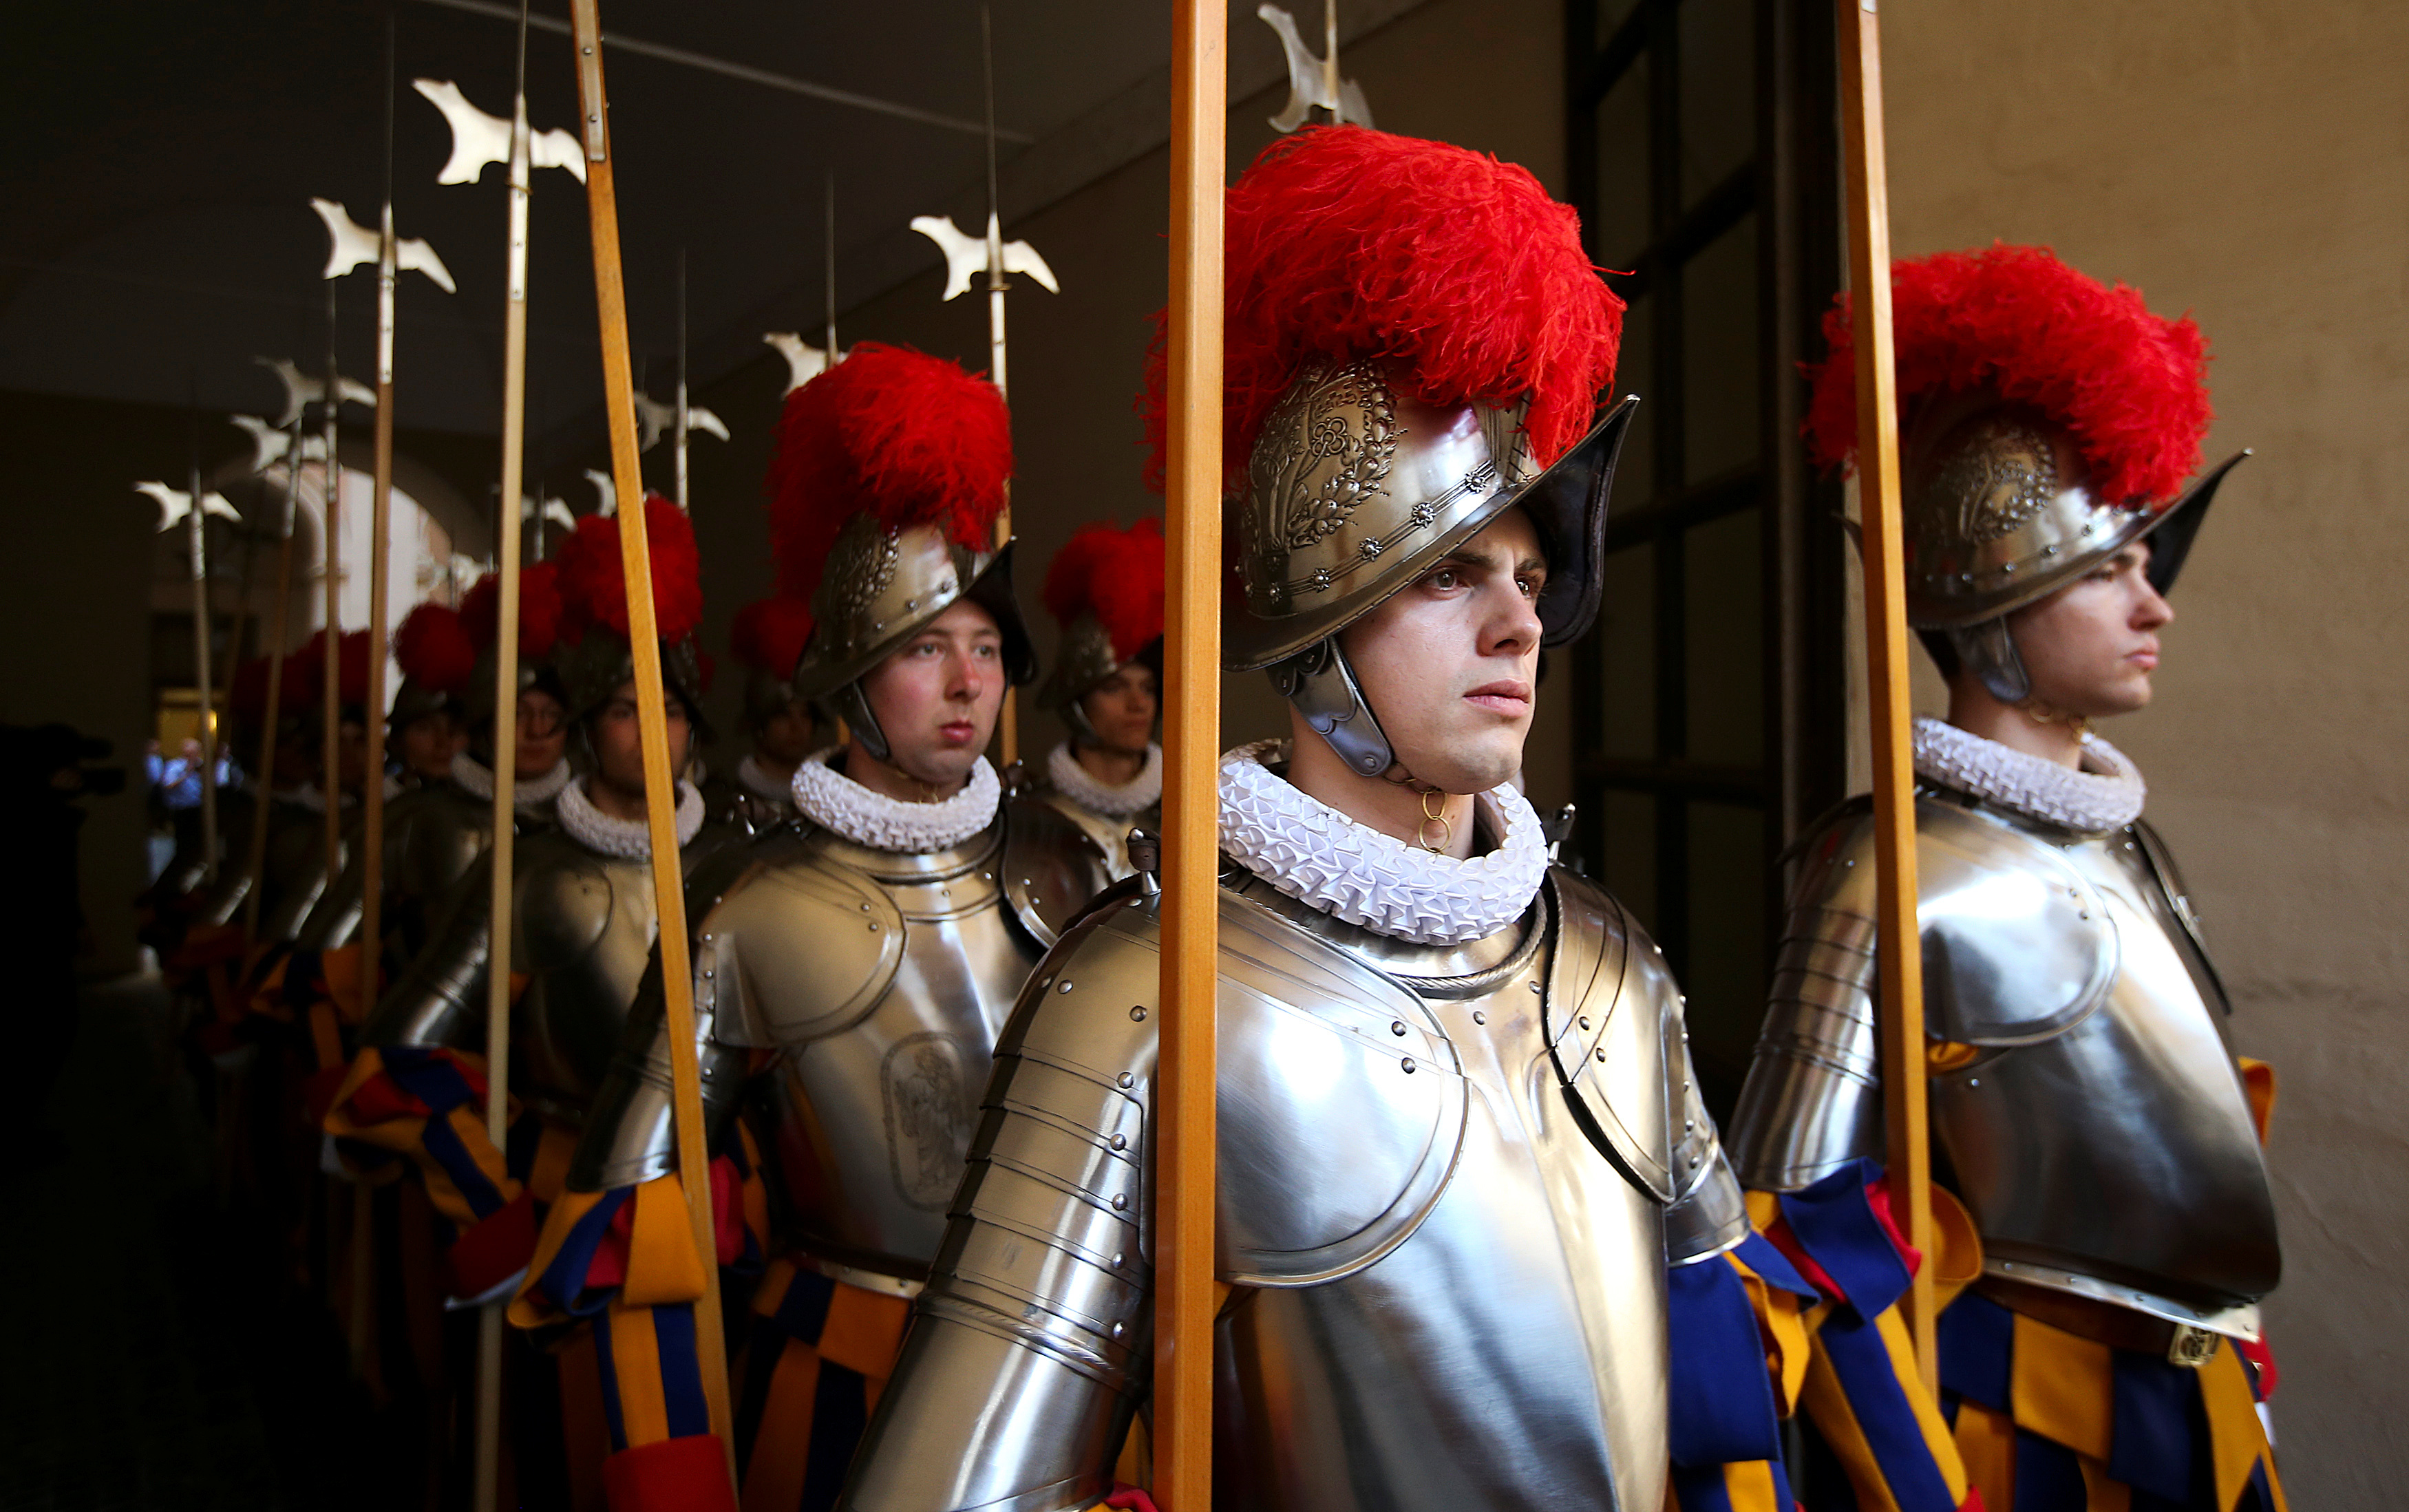 New recruits of the Vatican's elite Swiss Guard march during a swearing-in ceremony at the Vatican